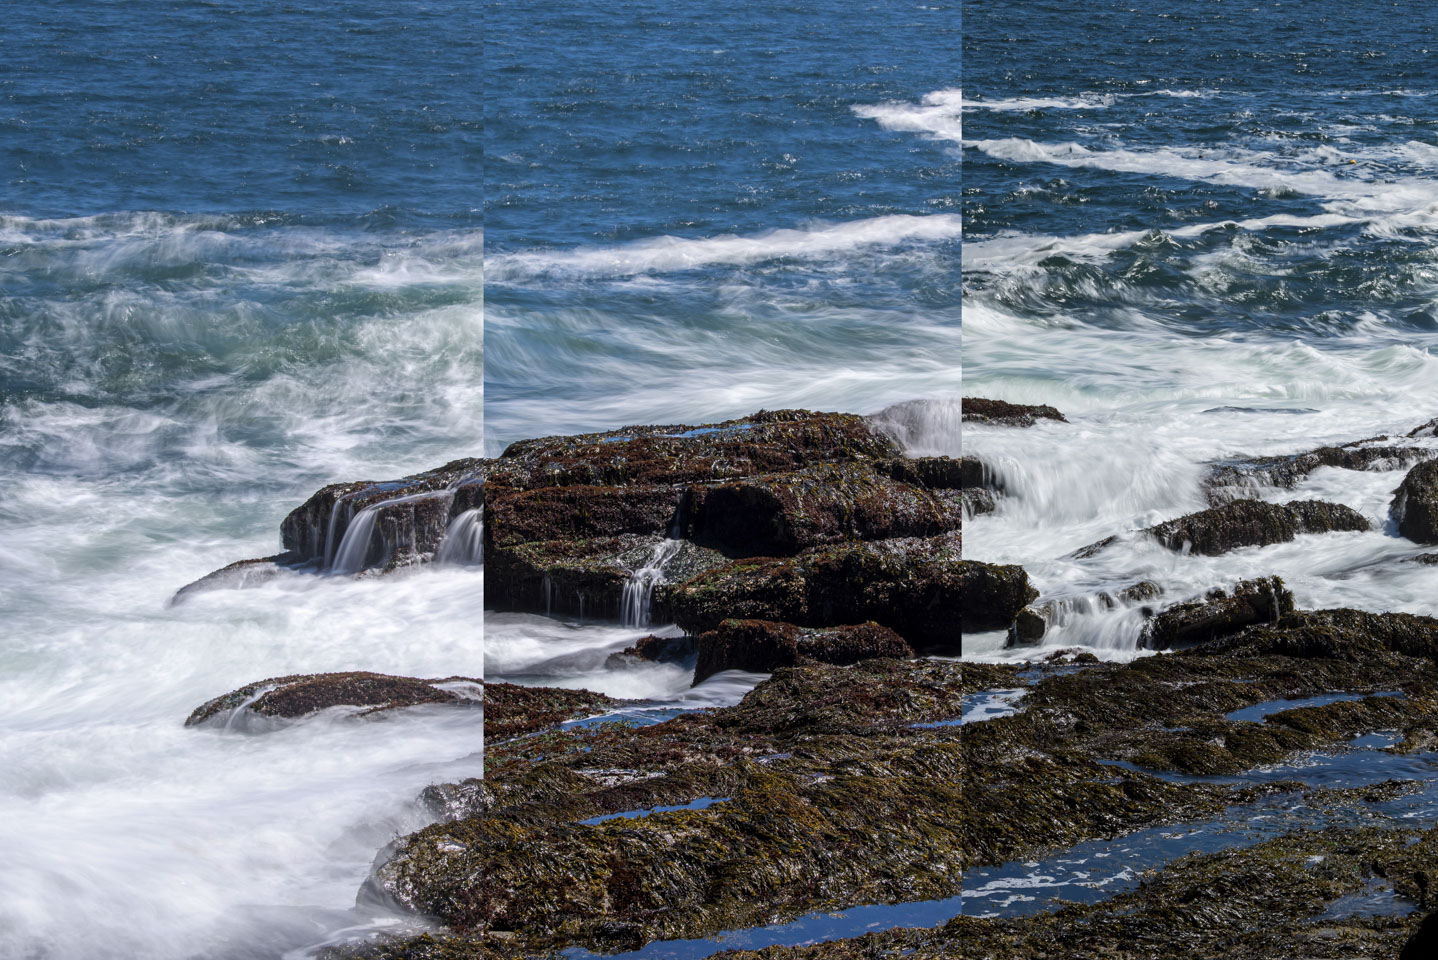 composite photo showing the same scene with different waves